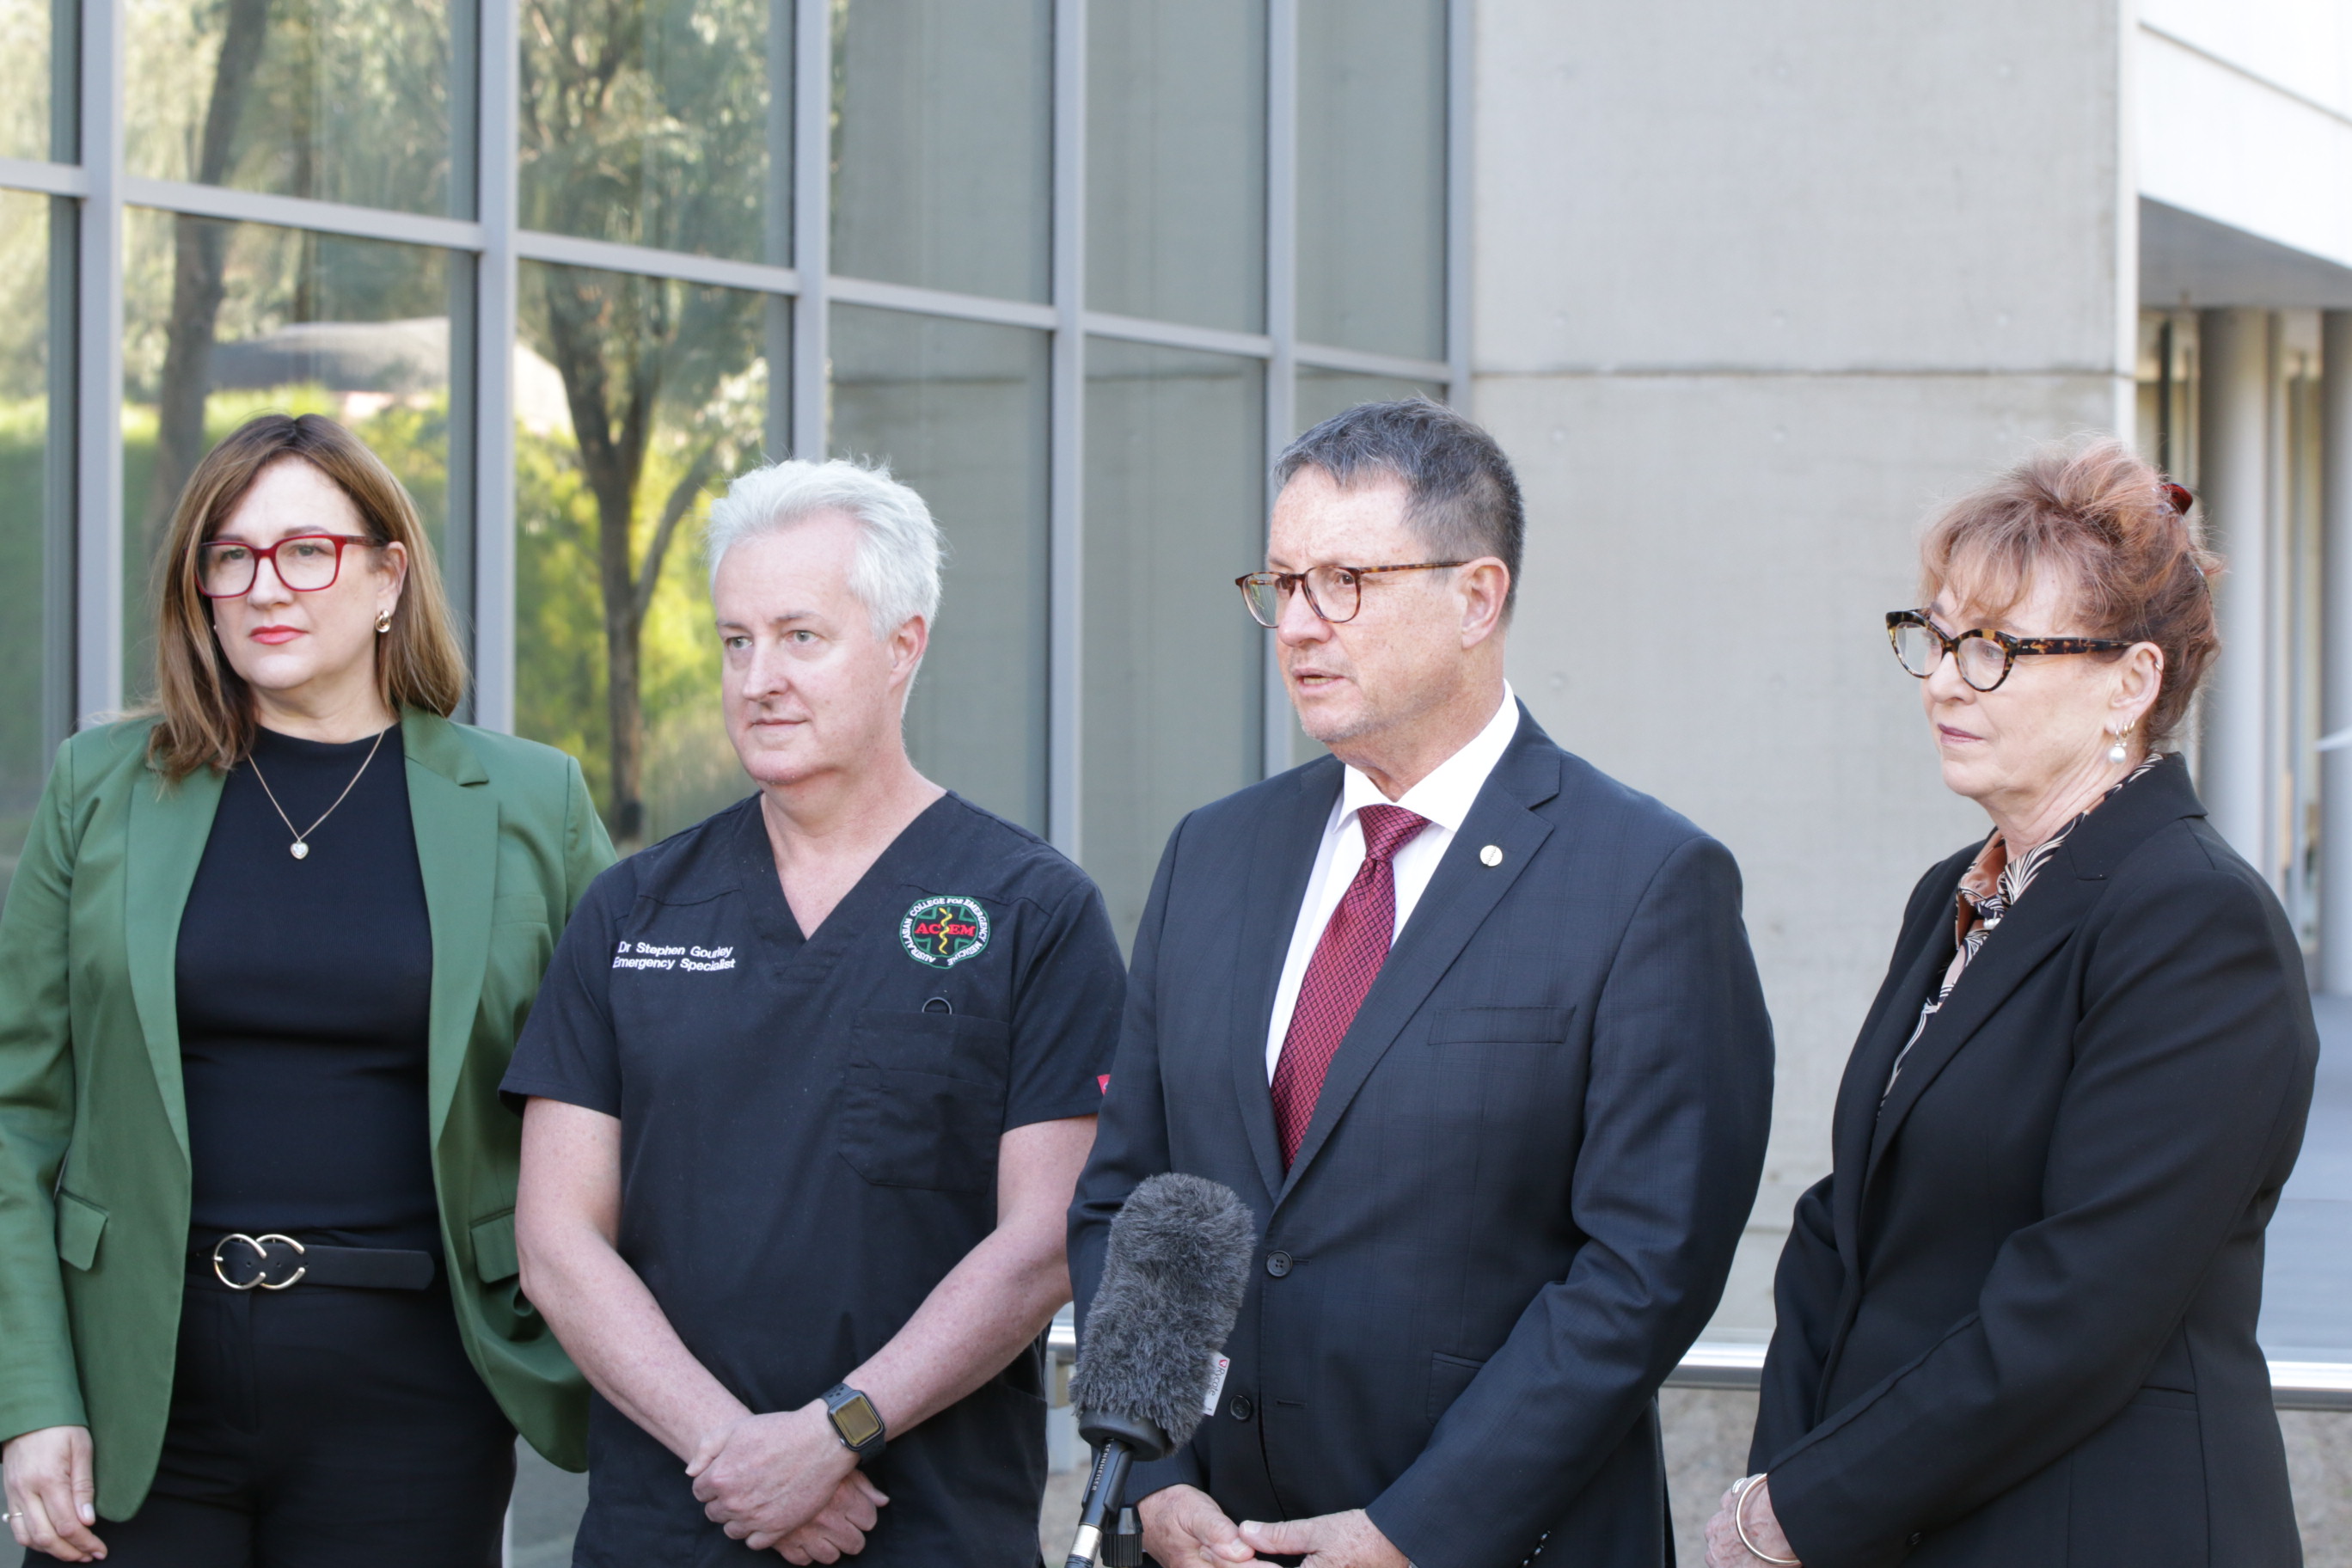 Professor Steve Robson (middle) at a press conference with (L-R) Dr Nicole Higgins, Dr Stephen Gourley and Associate Professor Kerin Fielding